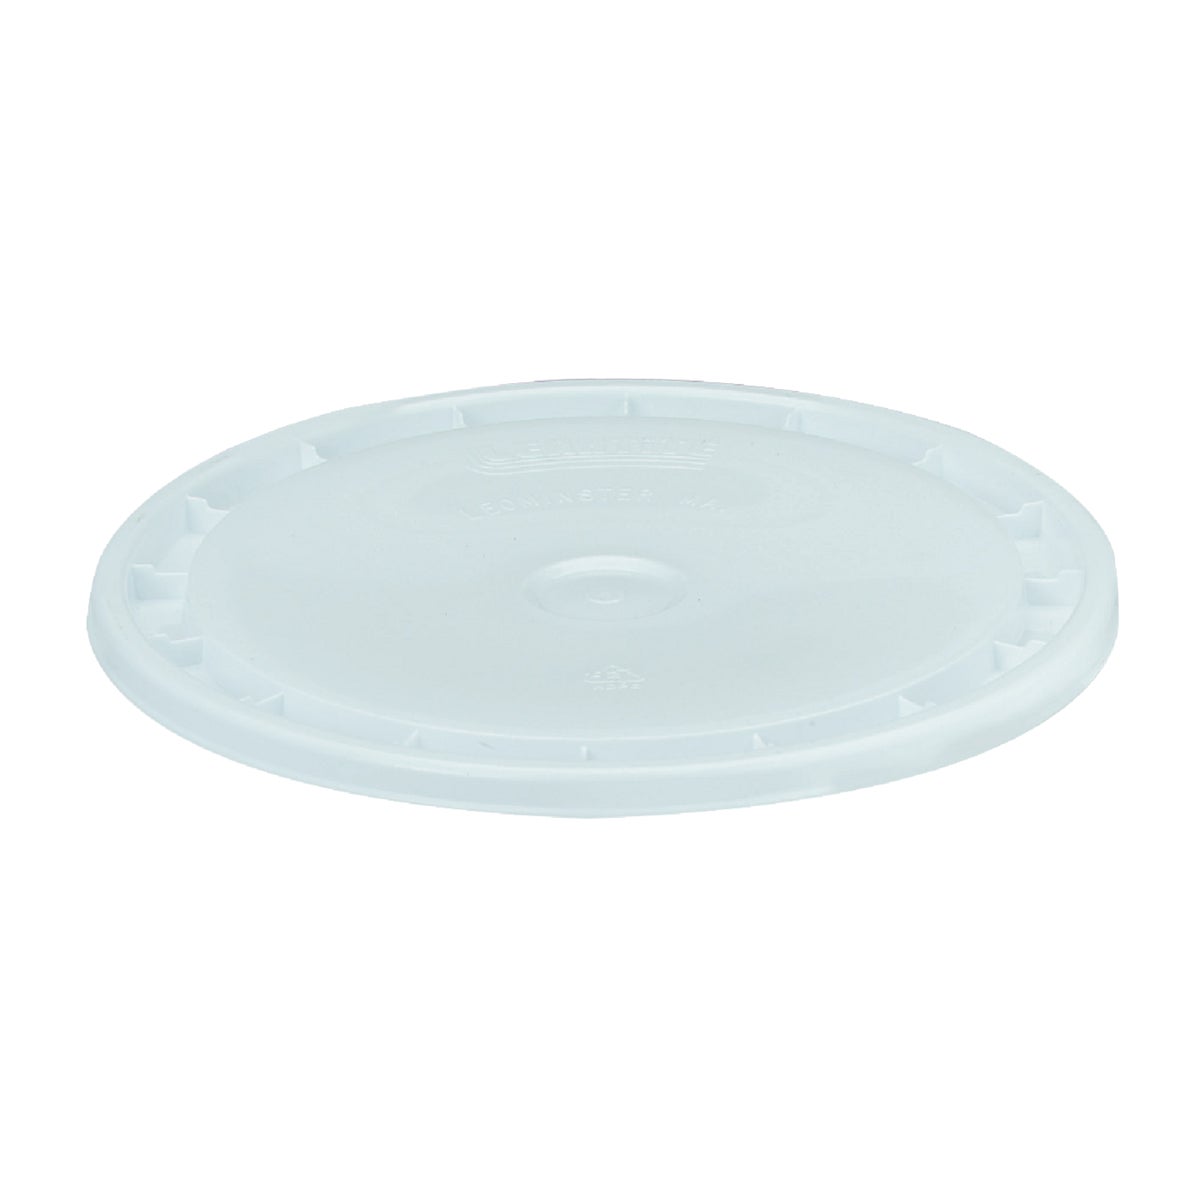 Leaktite Easy-Off 5 Gallon 12 in. x 1 in. White Lid